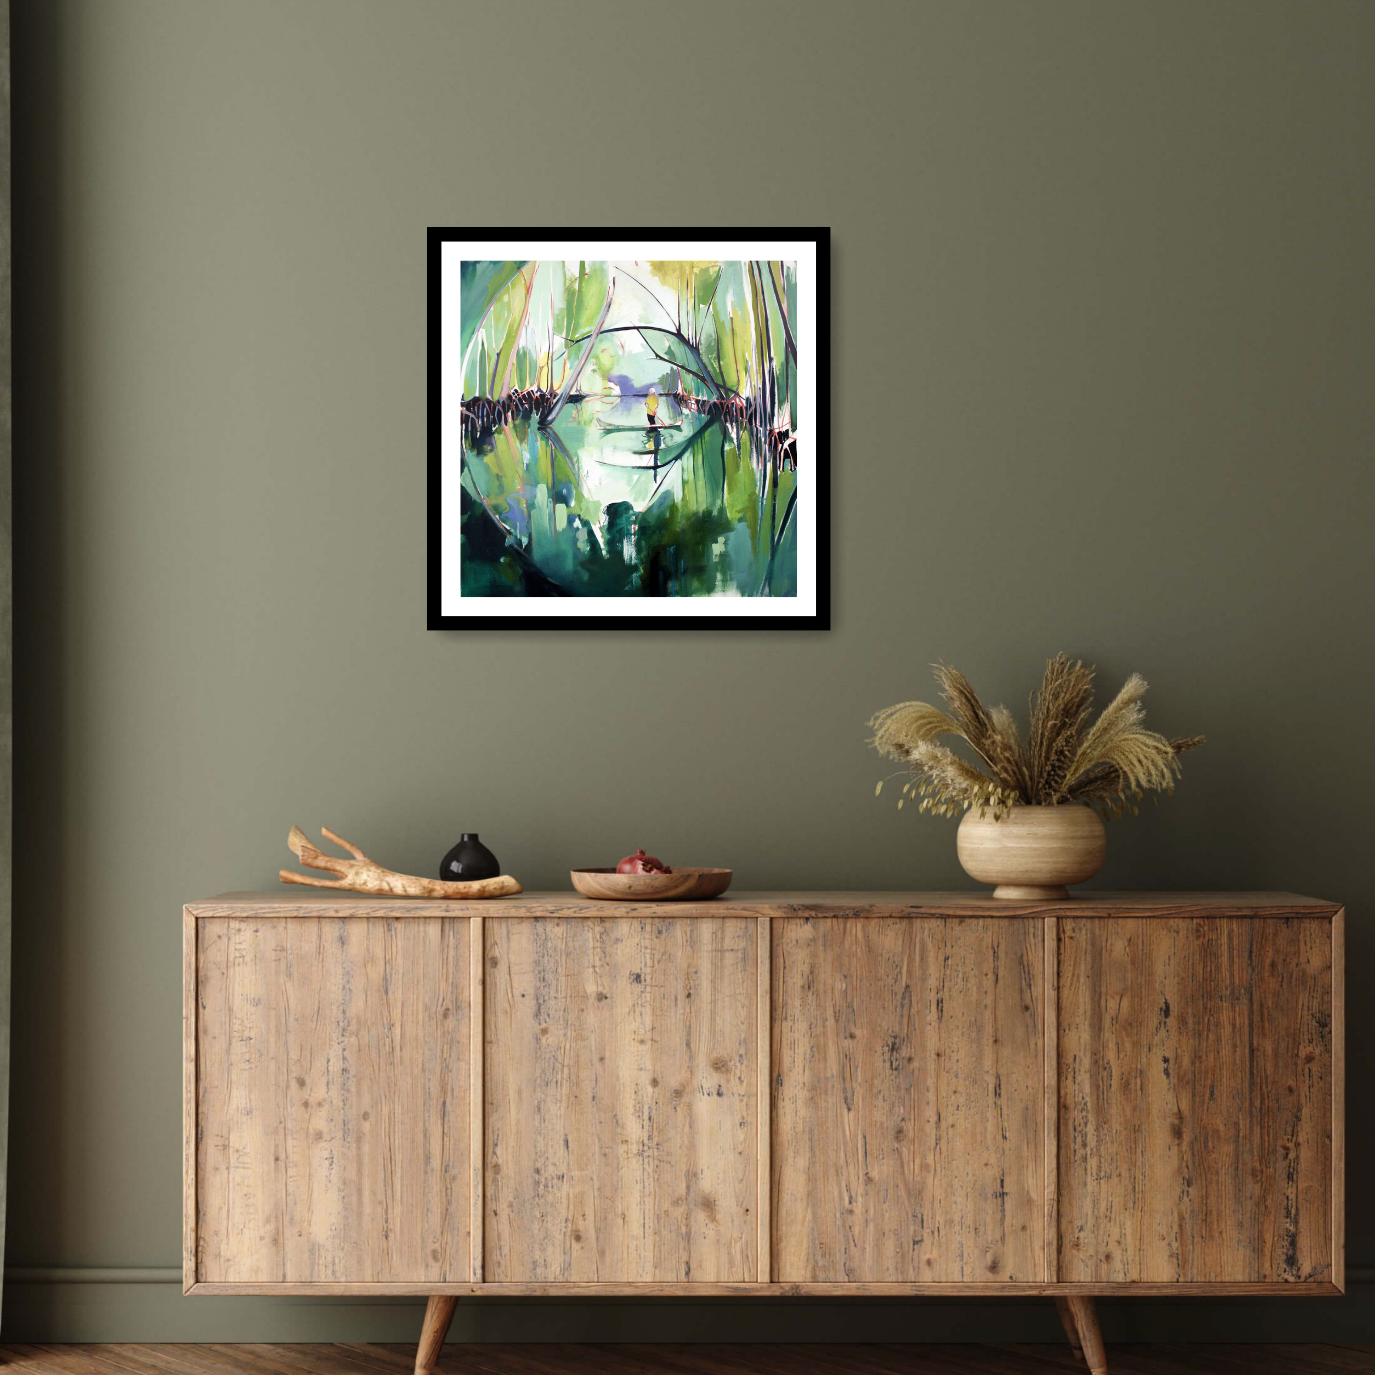 Black framed print ‘Reflected’ by Charlotte Evans: A vibrant contemporary landscape where the multicoloured hues of mangroves are beautifully reflected in the tranquil waters